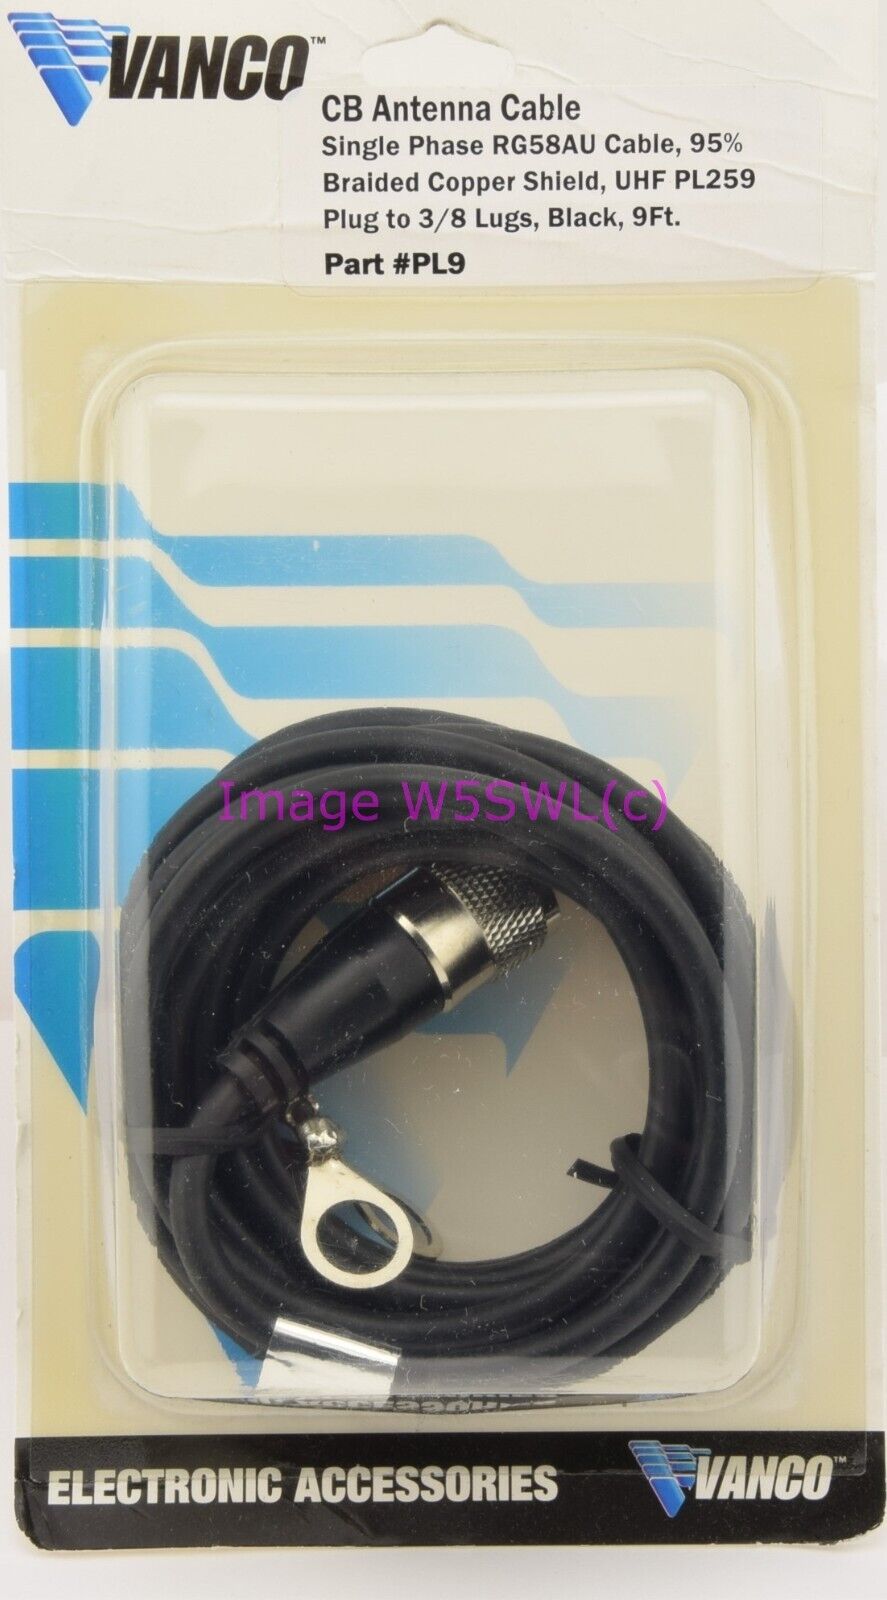 VANCO Antenna Cable RG58AU 9Ft PL-259 to Lugs - Dave's Hobby Shop by W5SWL